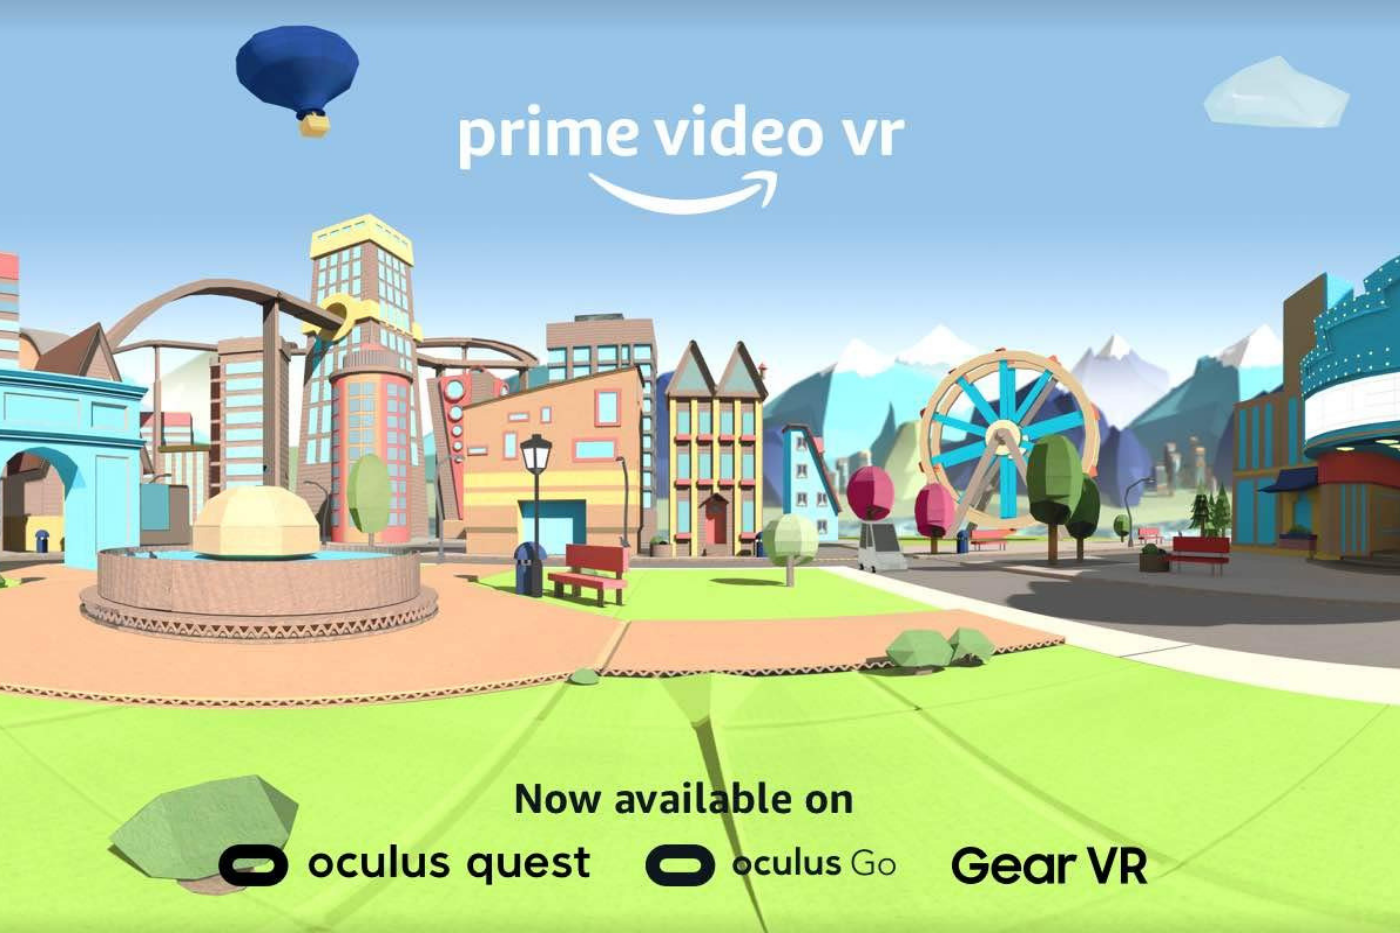 Amazon Prime Launches New Platform for VR Experiences